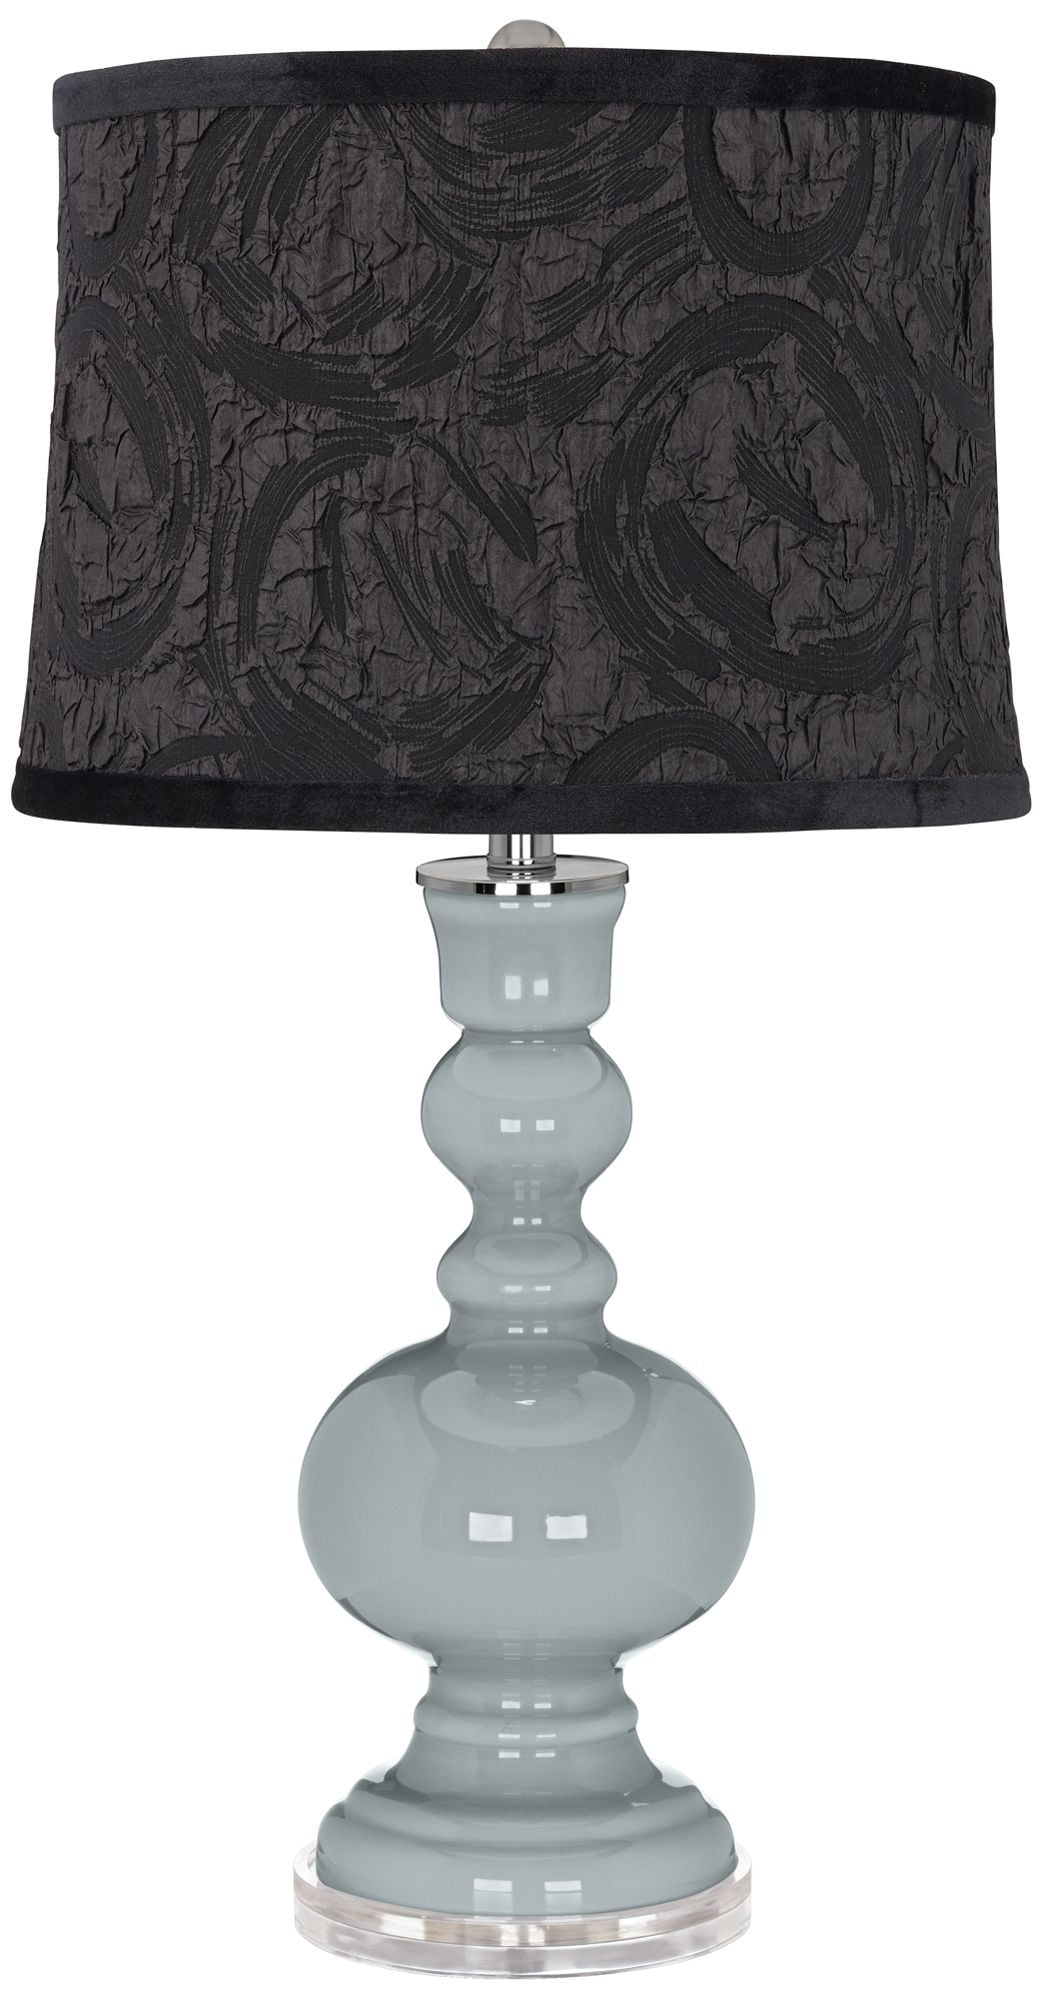 Color + Plus Naval Apothecary Table Lamp w/ Requena Blue Shade - Walmart.com